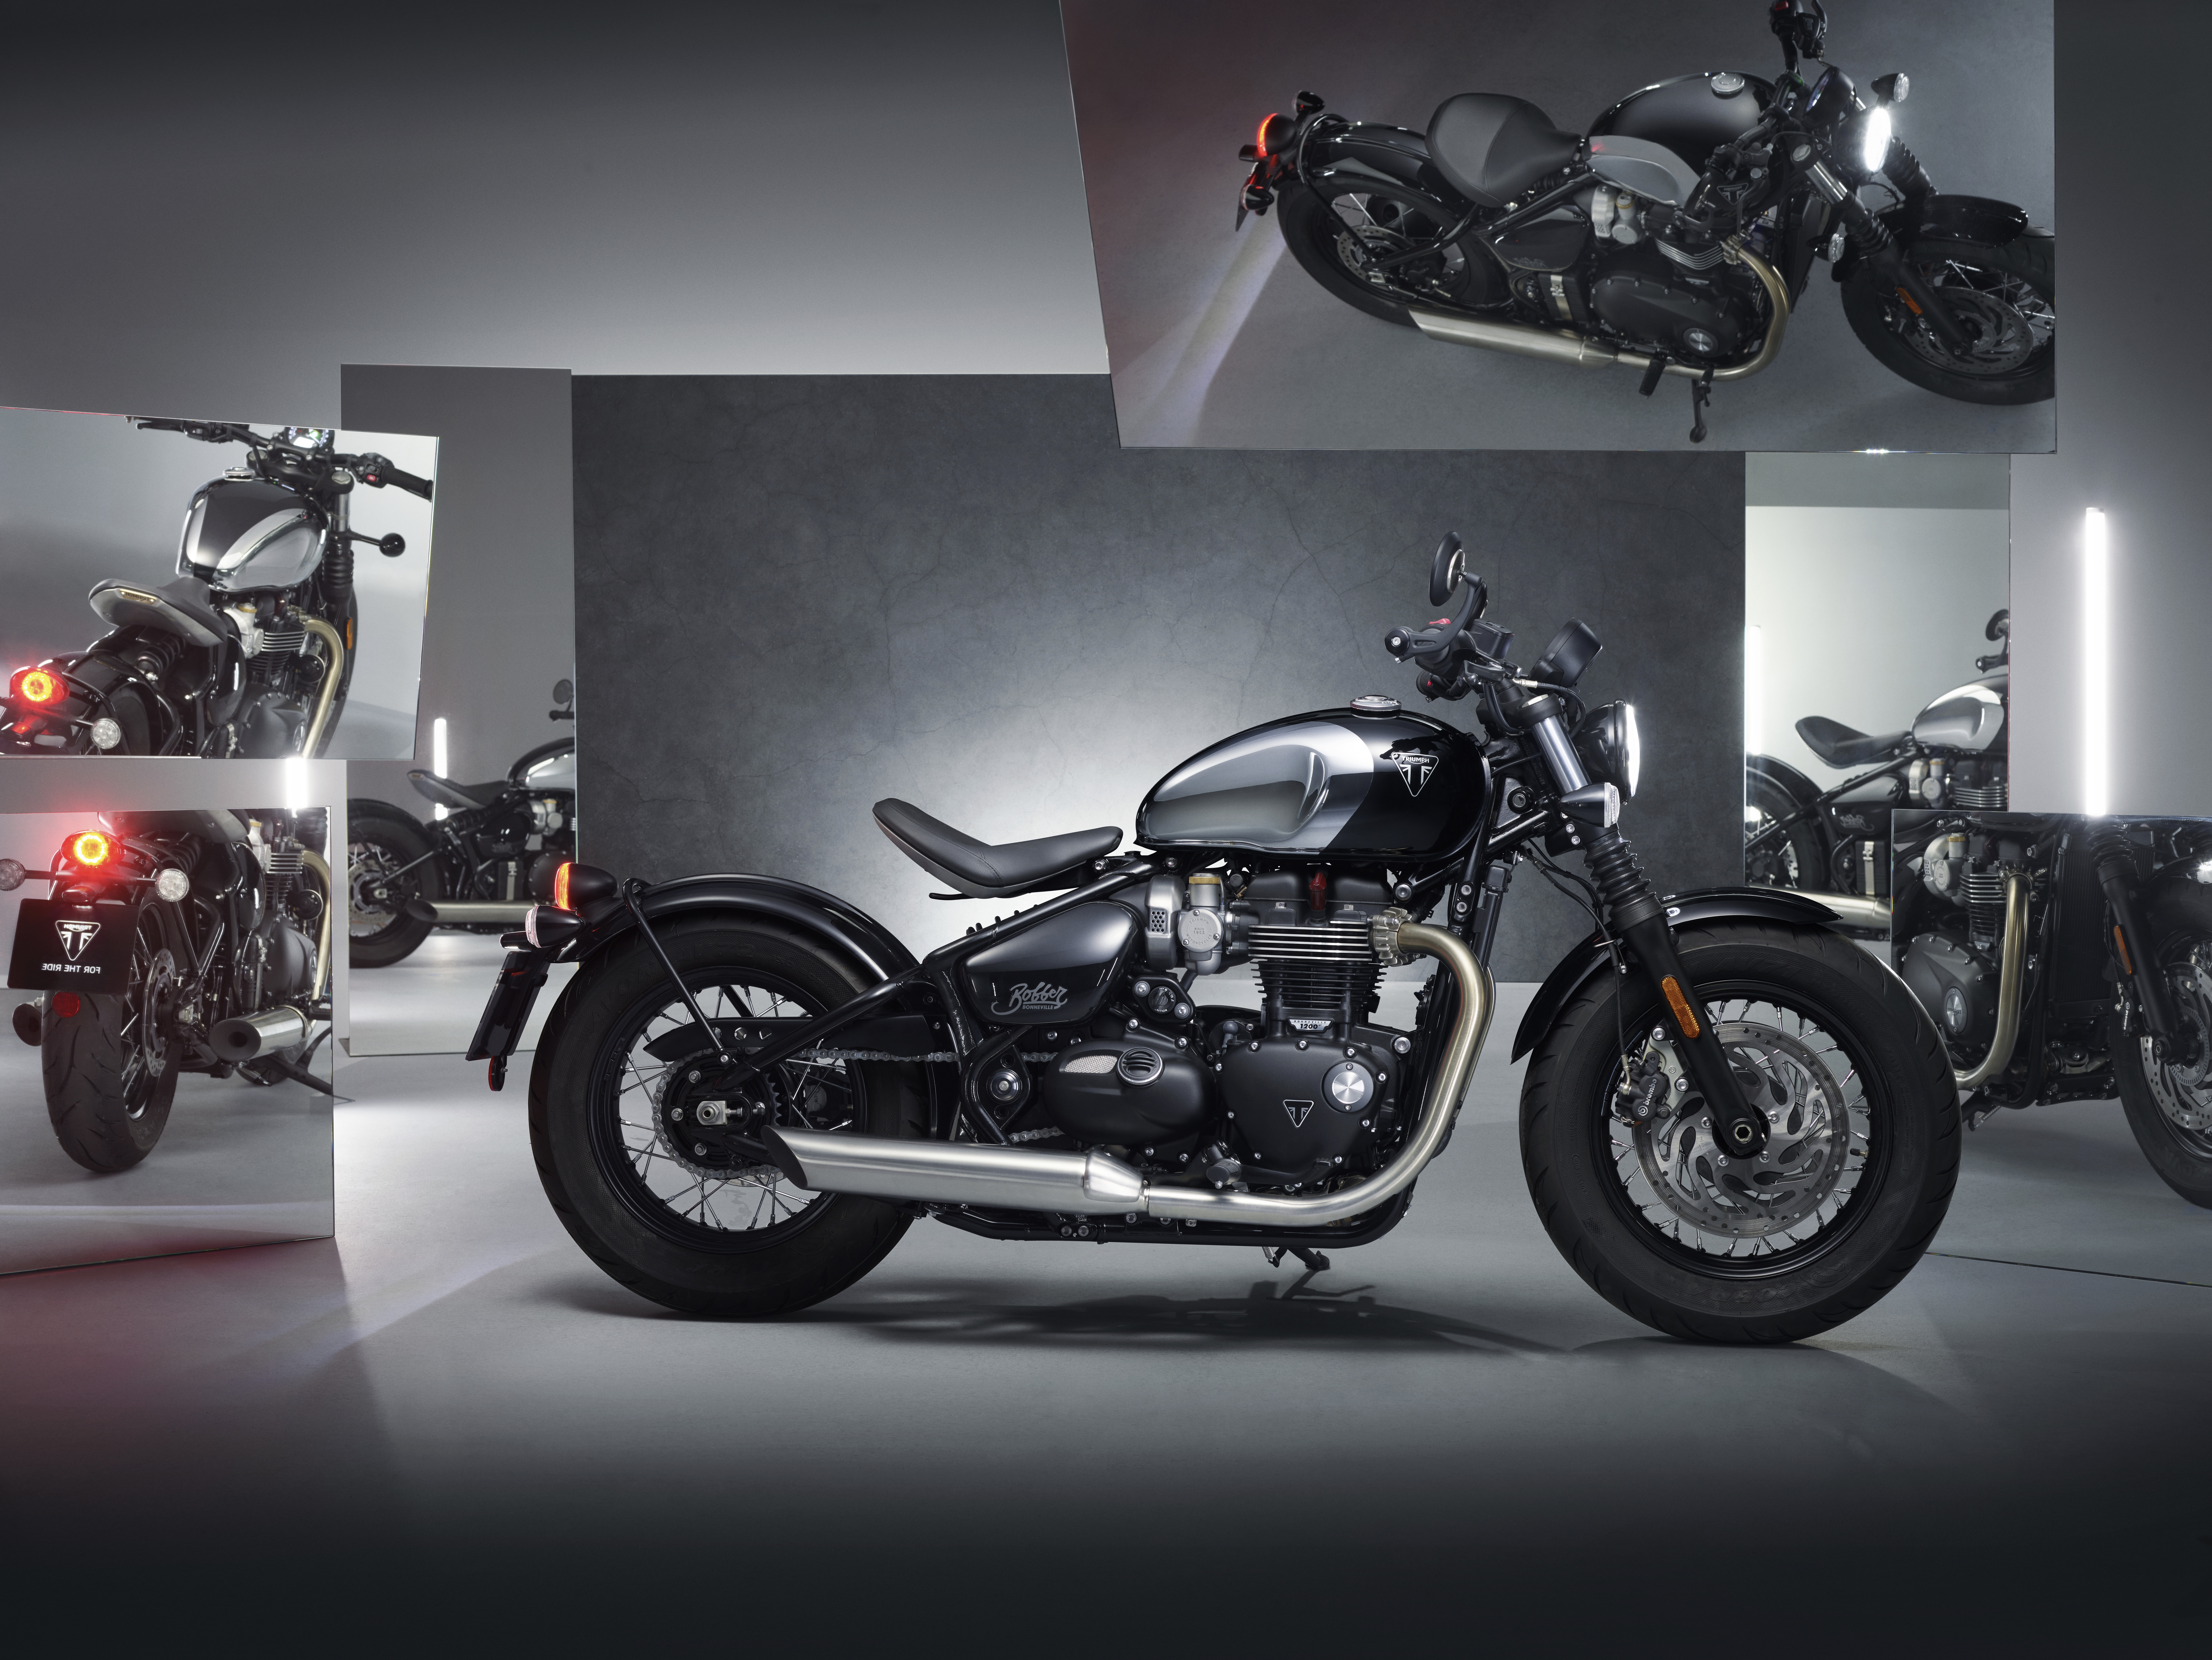 HD wallpaper of a Triumph Bonneville Bobber Chrome Edition showcased among other Triumph motorcycles.